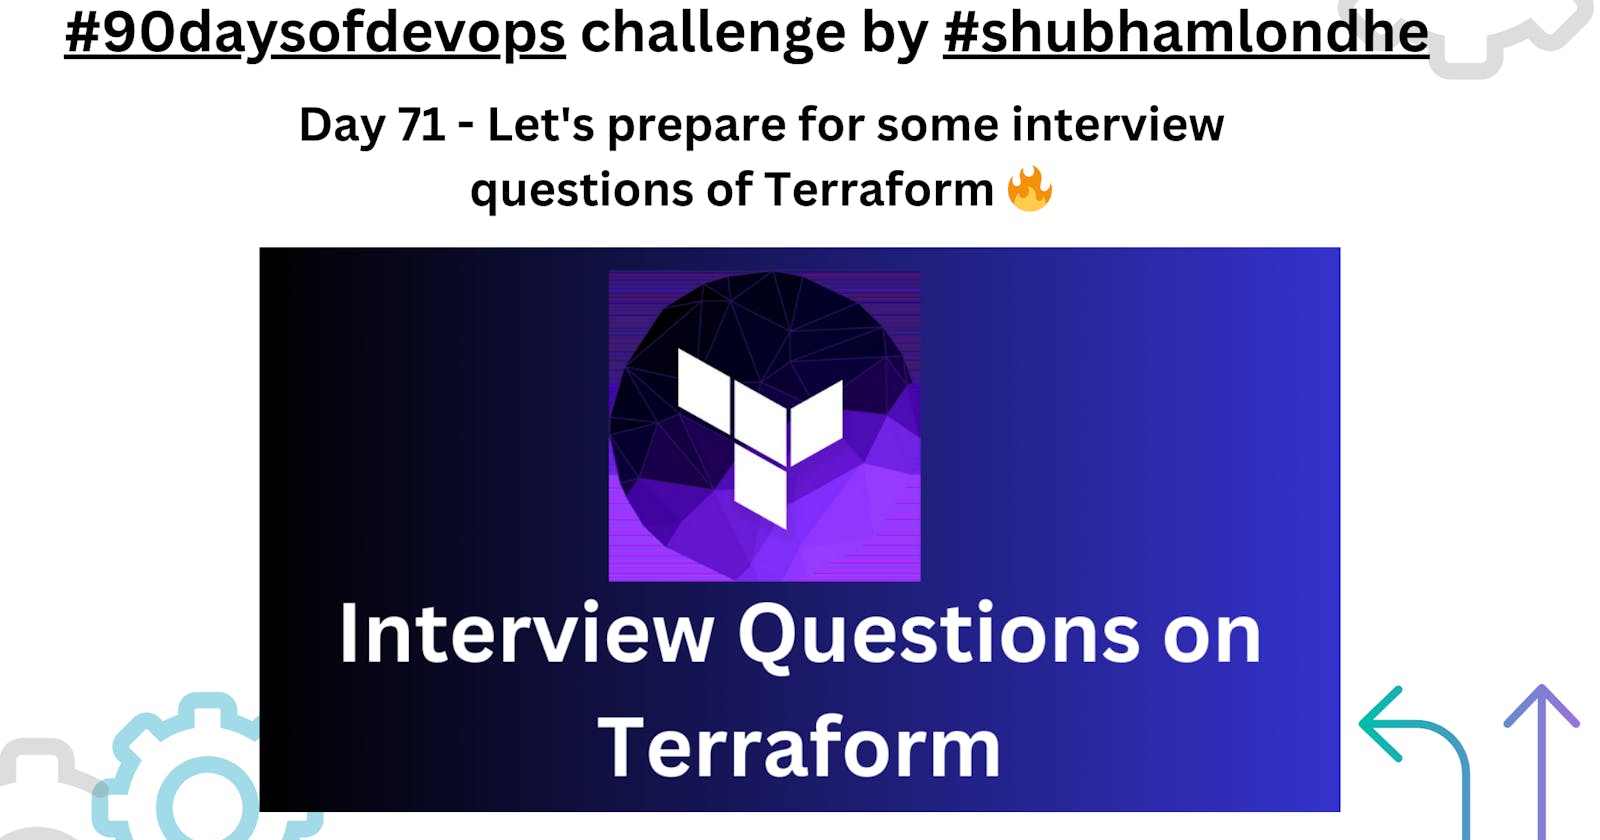 Day 71 - Let's prepare for some interview questions of Terraform 🔥